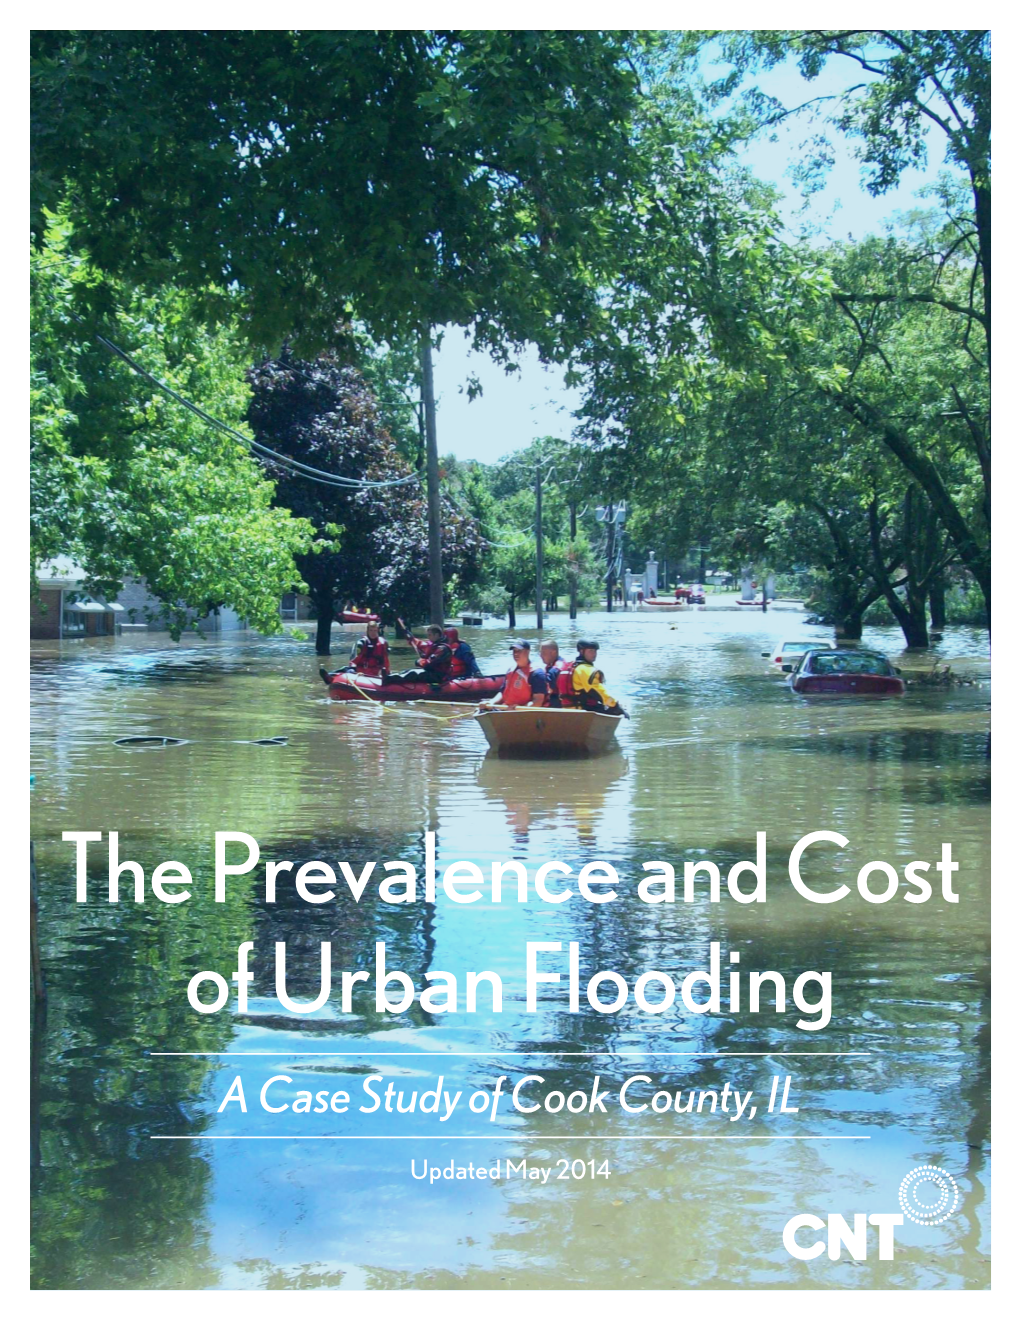 The Prevalence and Cost of Urban Flooding a Case Study of Cook County, IL